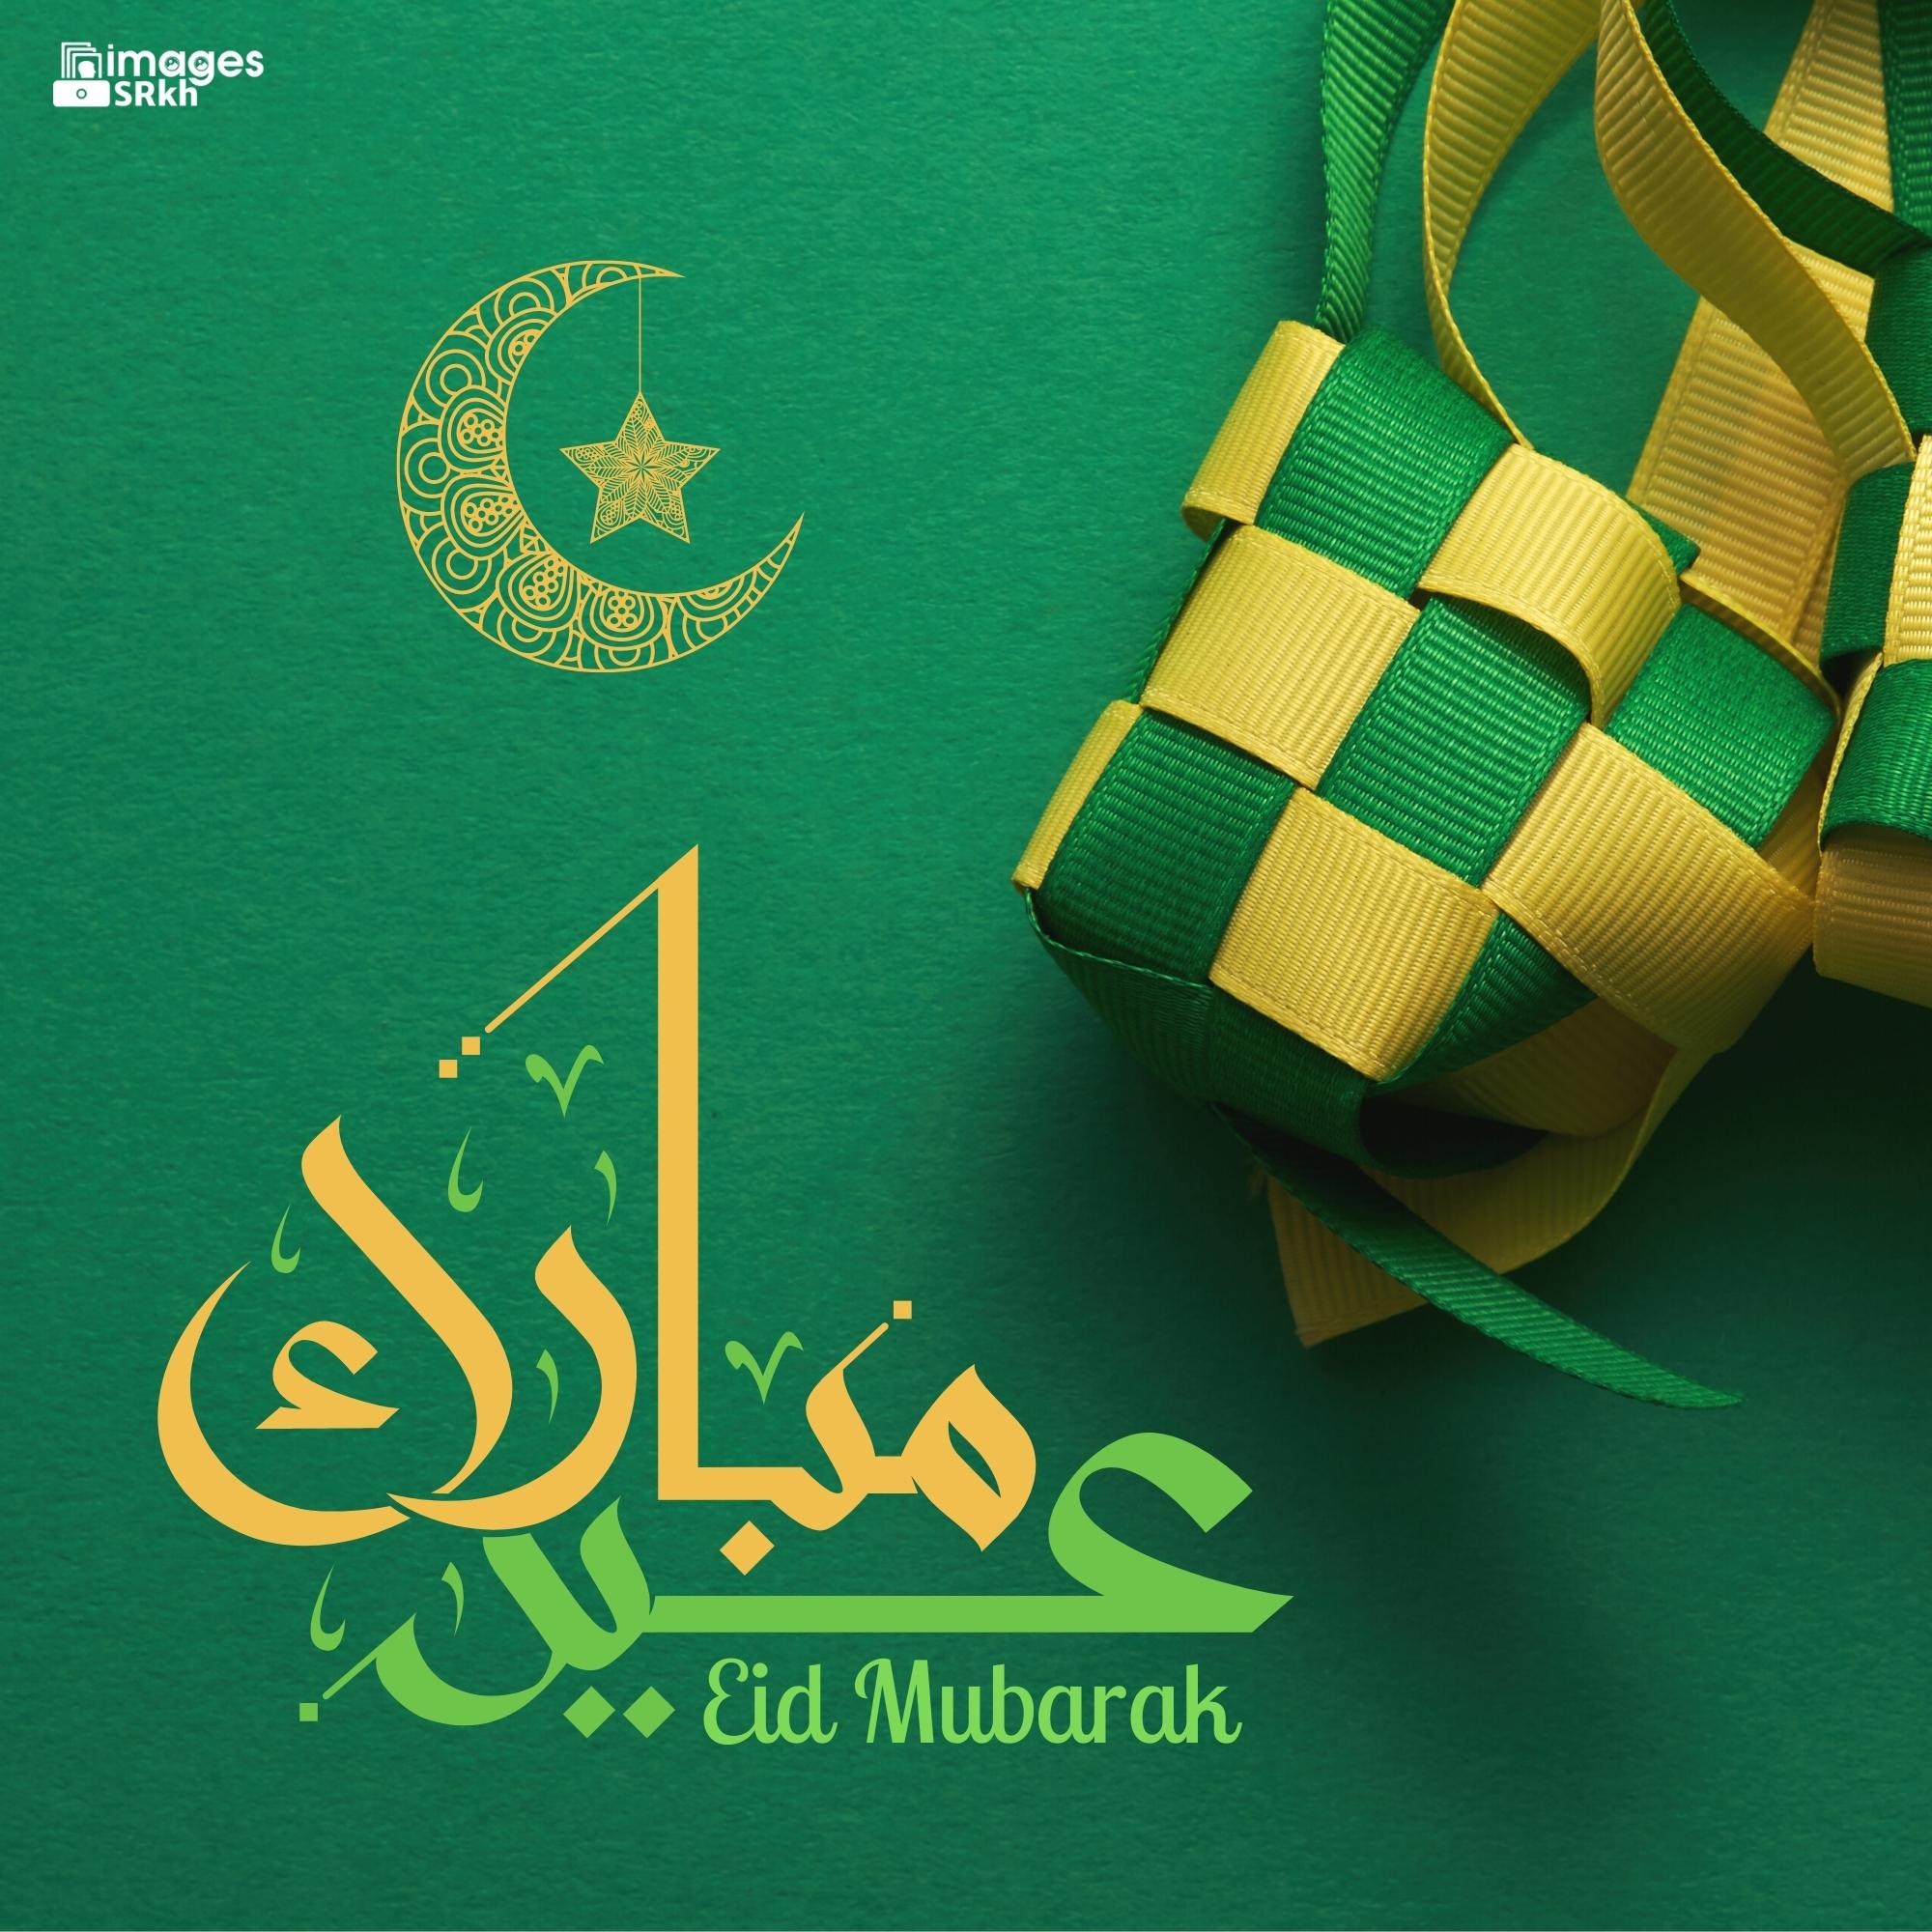 Pictures Eid Mubarak (3) | Download free in Hd Quality | imagesSRkh